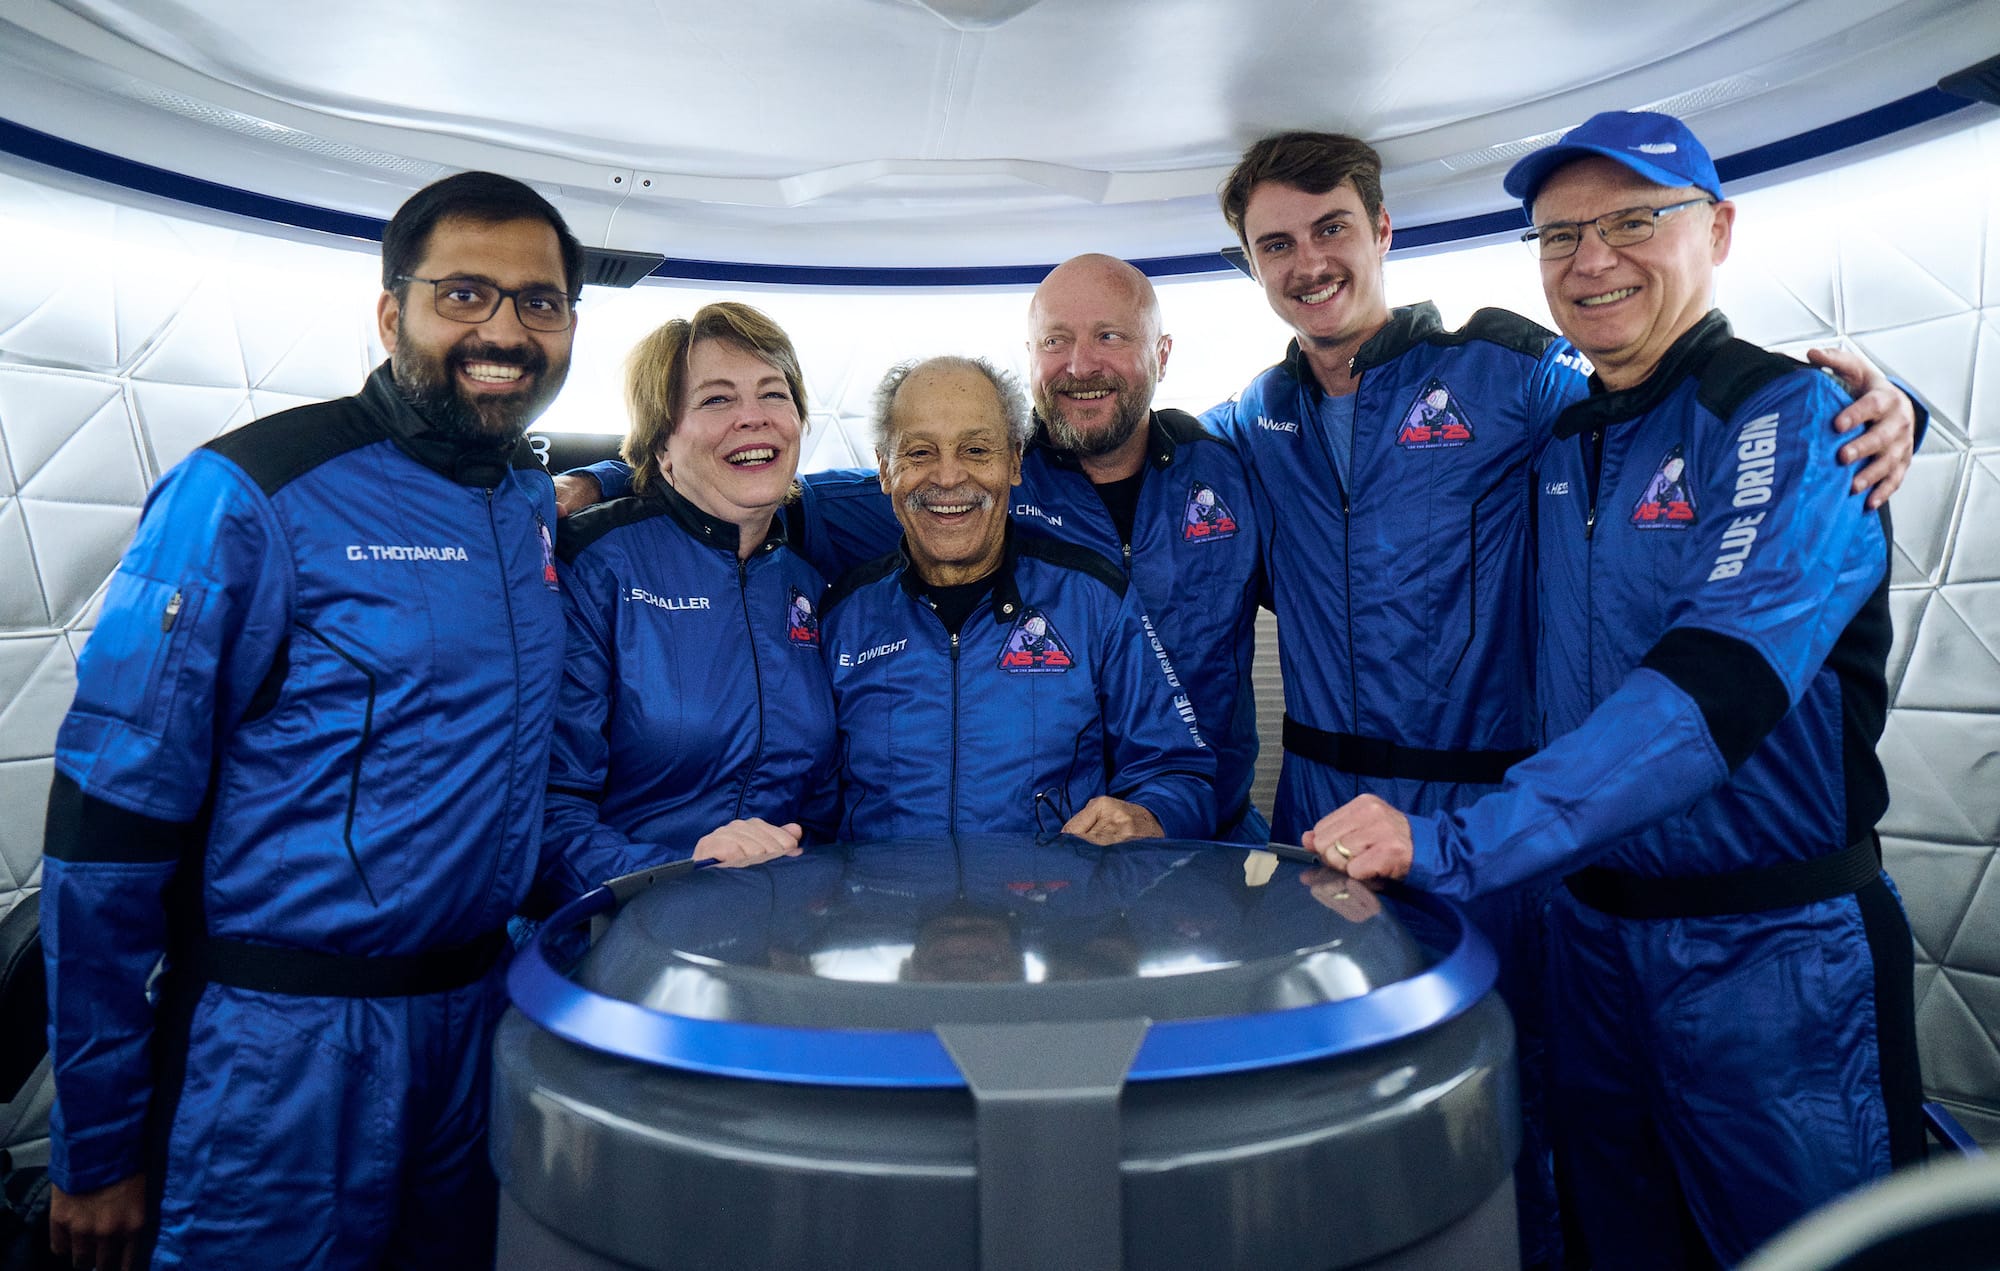 The crew of the NS-25 mission: (from left to right) Gopi Thotakura, Carol Schaller, Ed Dwight, Sylvain Chiron, Mason Angel, and Ken Hess. ©Blue Origin